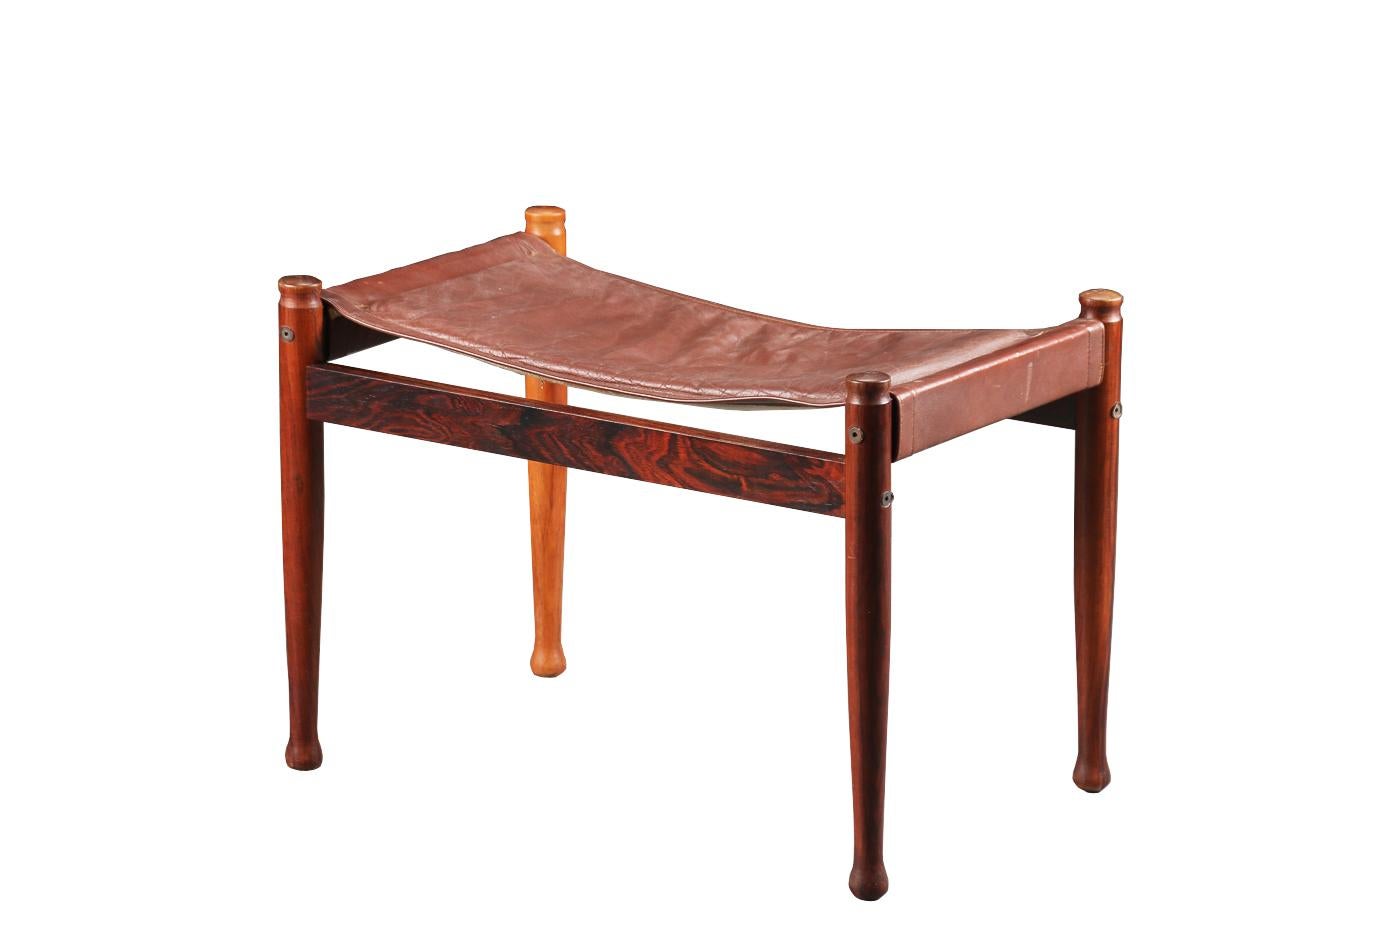 Safari Ottoman designed by Erik Worts for Niels Eilersen, Denmark, 1960. Made of solid rosewood and leather. Very nice patinated leather seat but still in good vintage condition. 

Stamped below

The ottoman is in good condition. The wood was